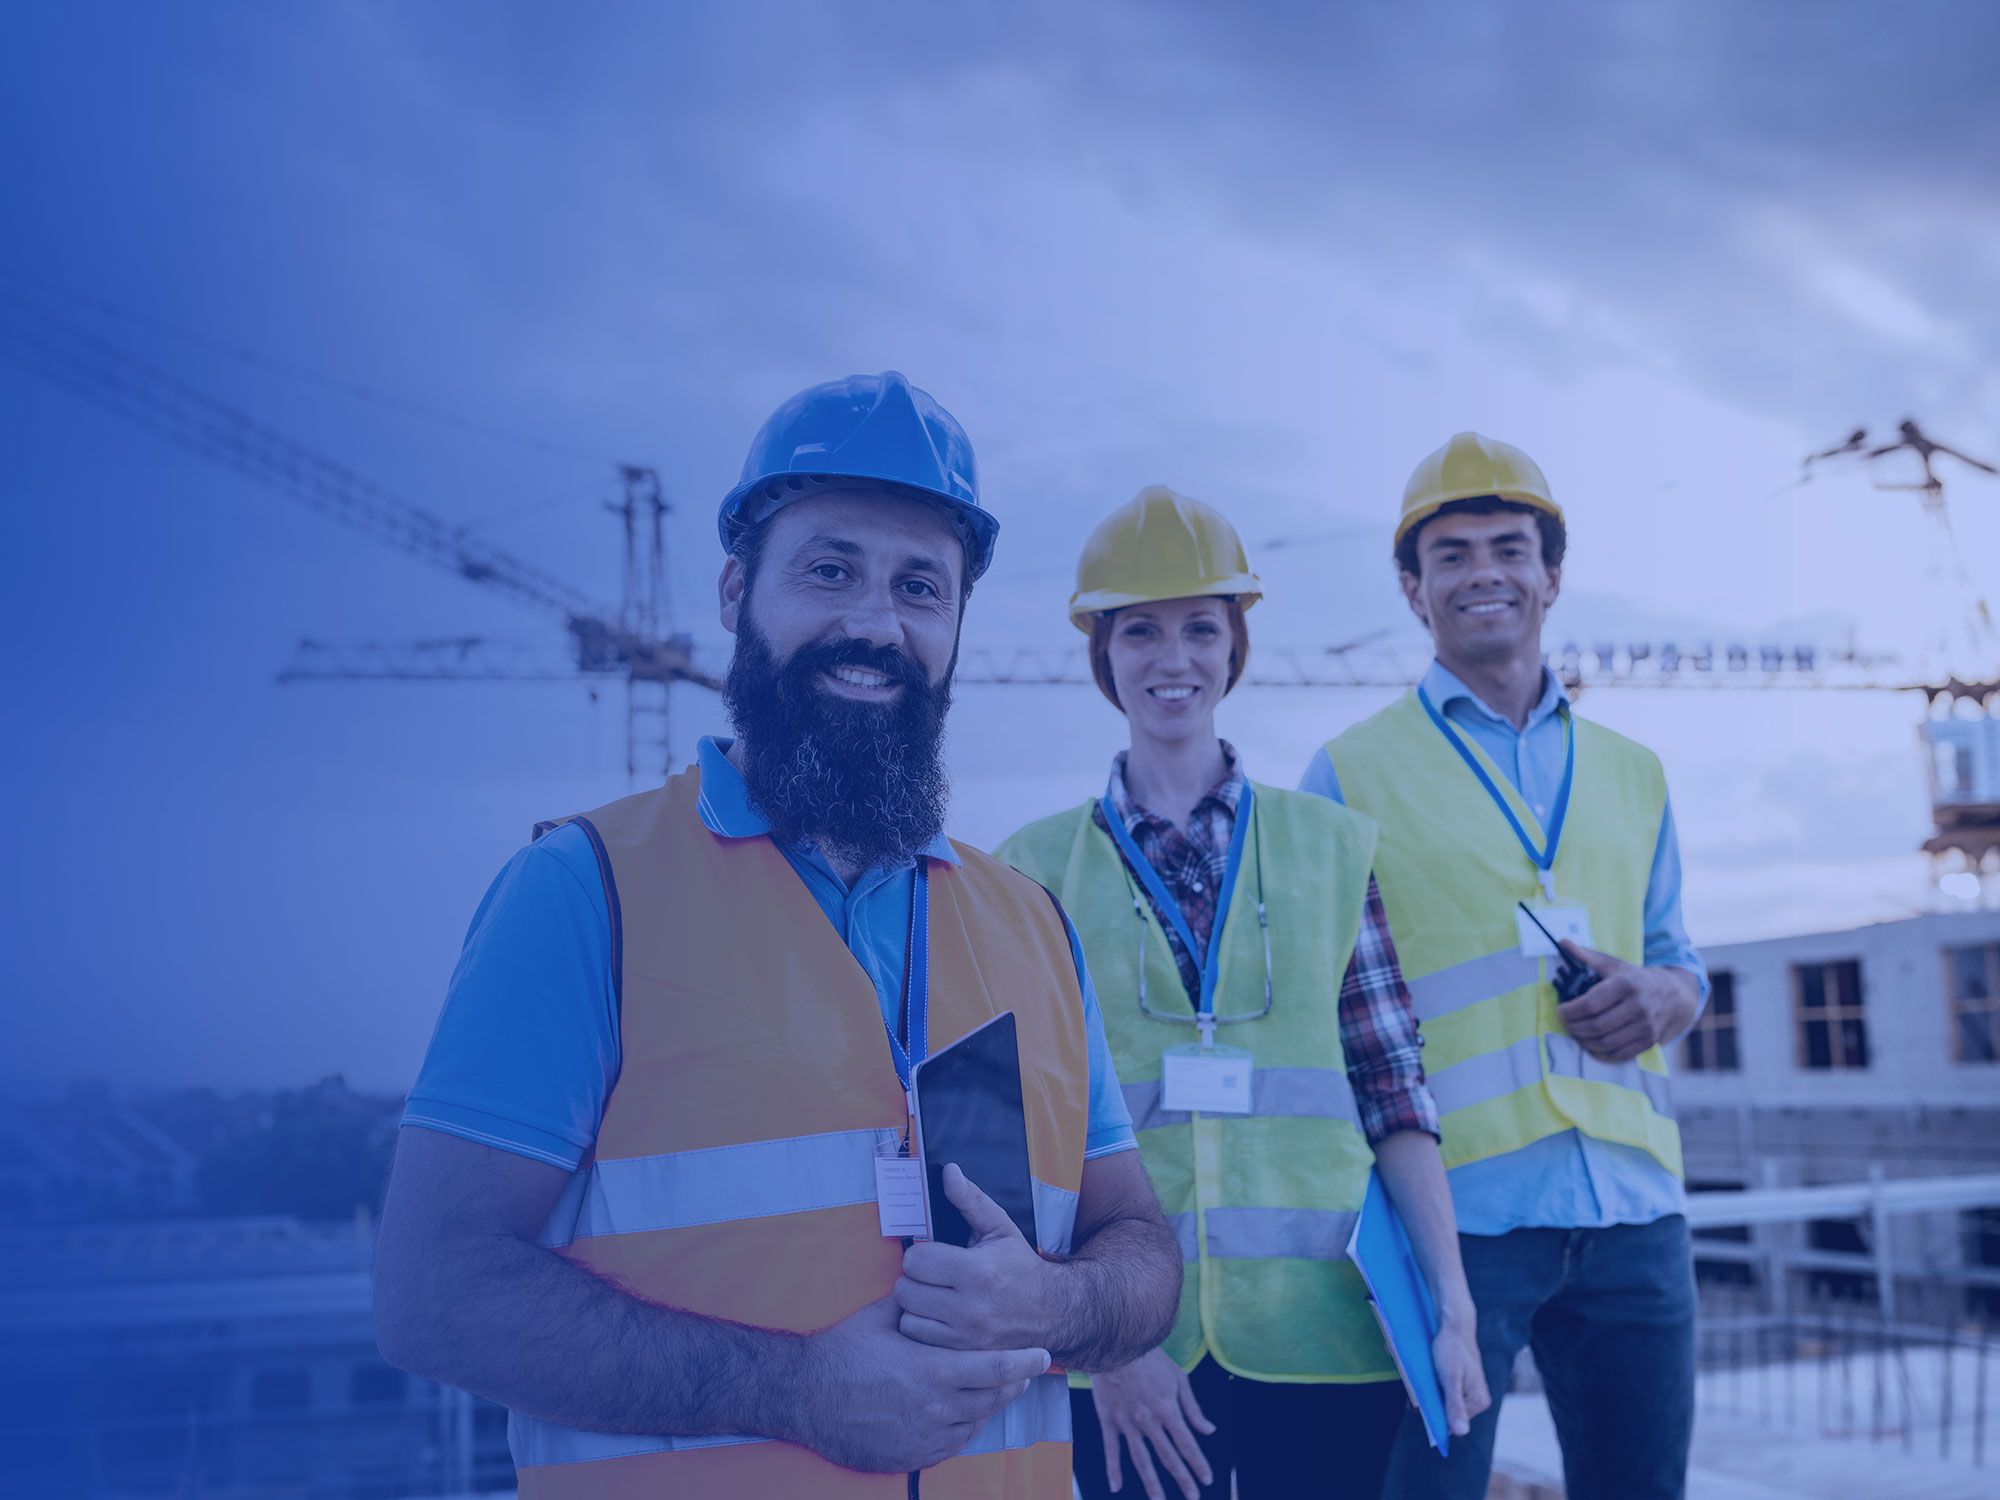 KPMG infrastructure consulting offers infrastructure project management and delivery services